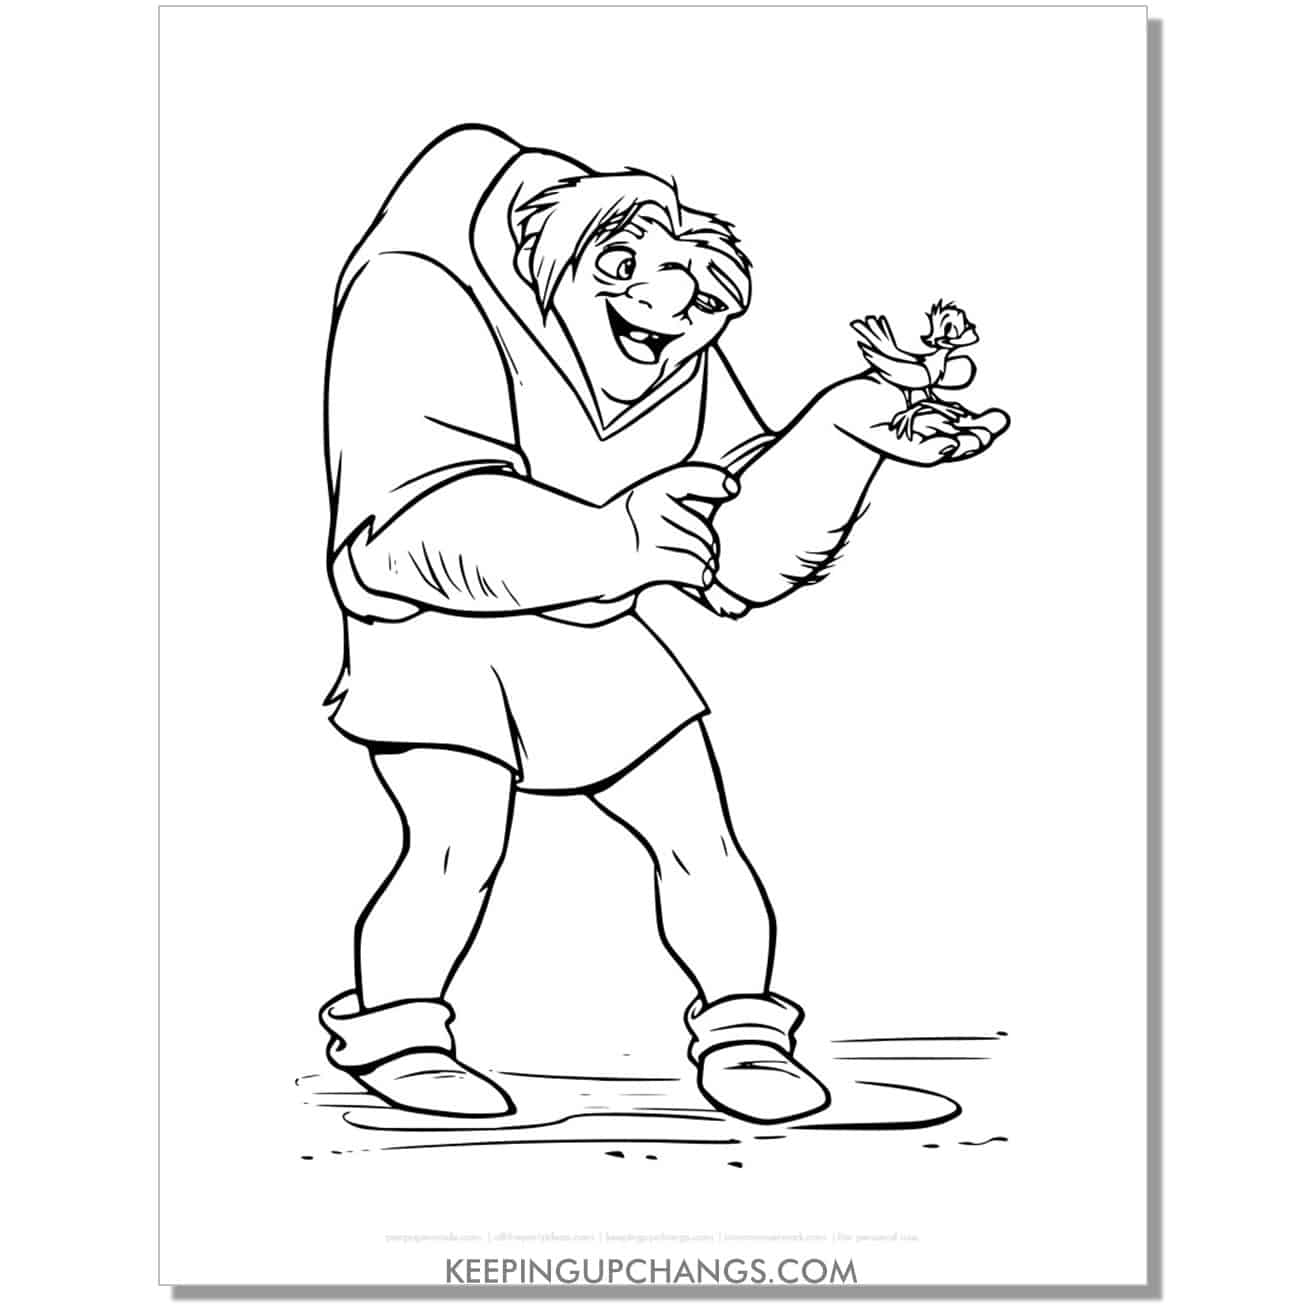 free quasimodo with bird hunchback notre dame coloring page, sheet.